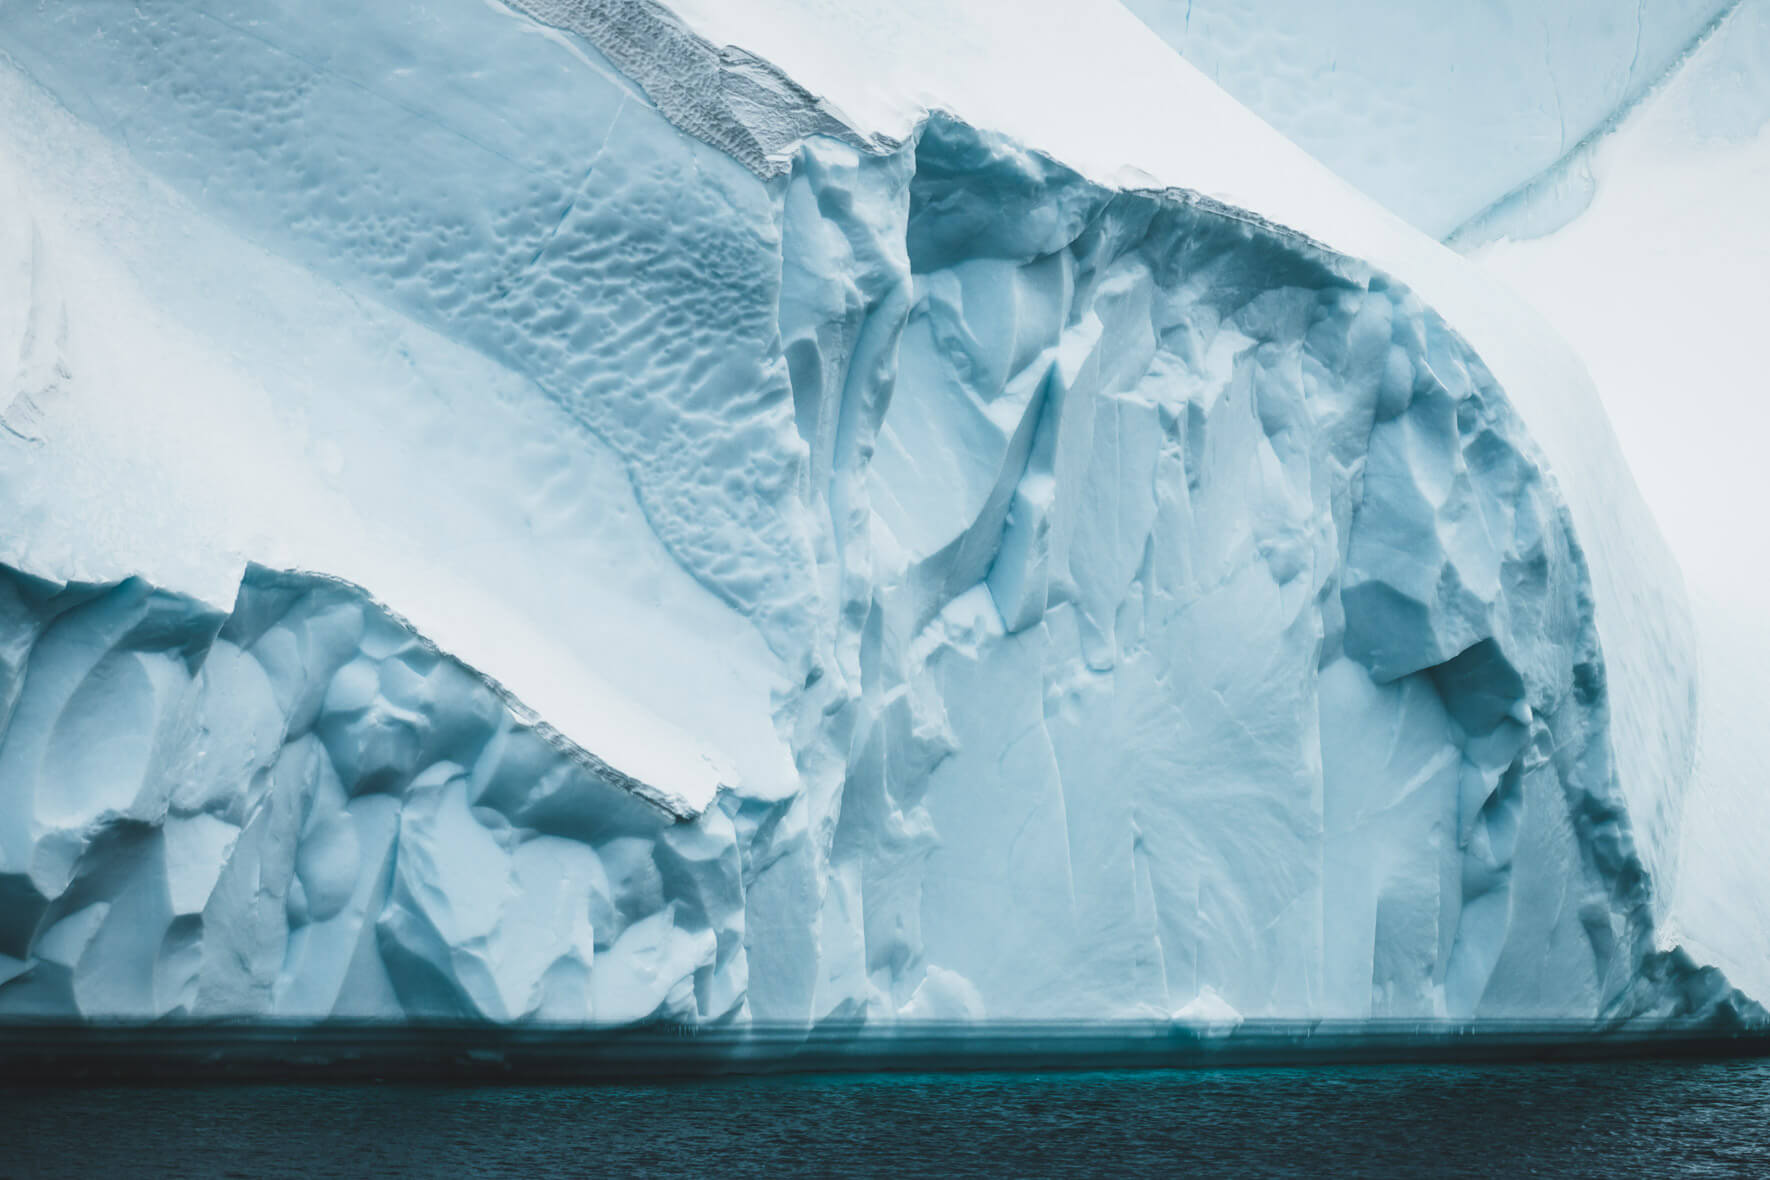 Wall of ice in the Ilulissat Icefjord on the west coast of Greenland